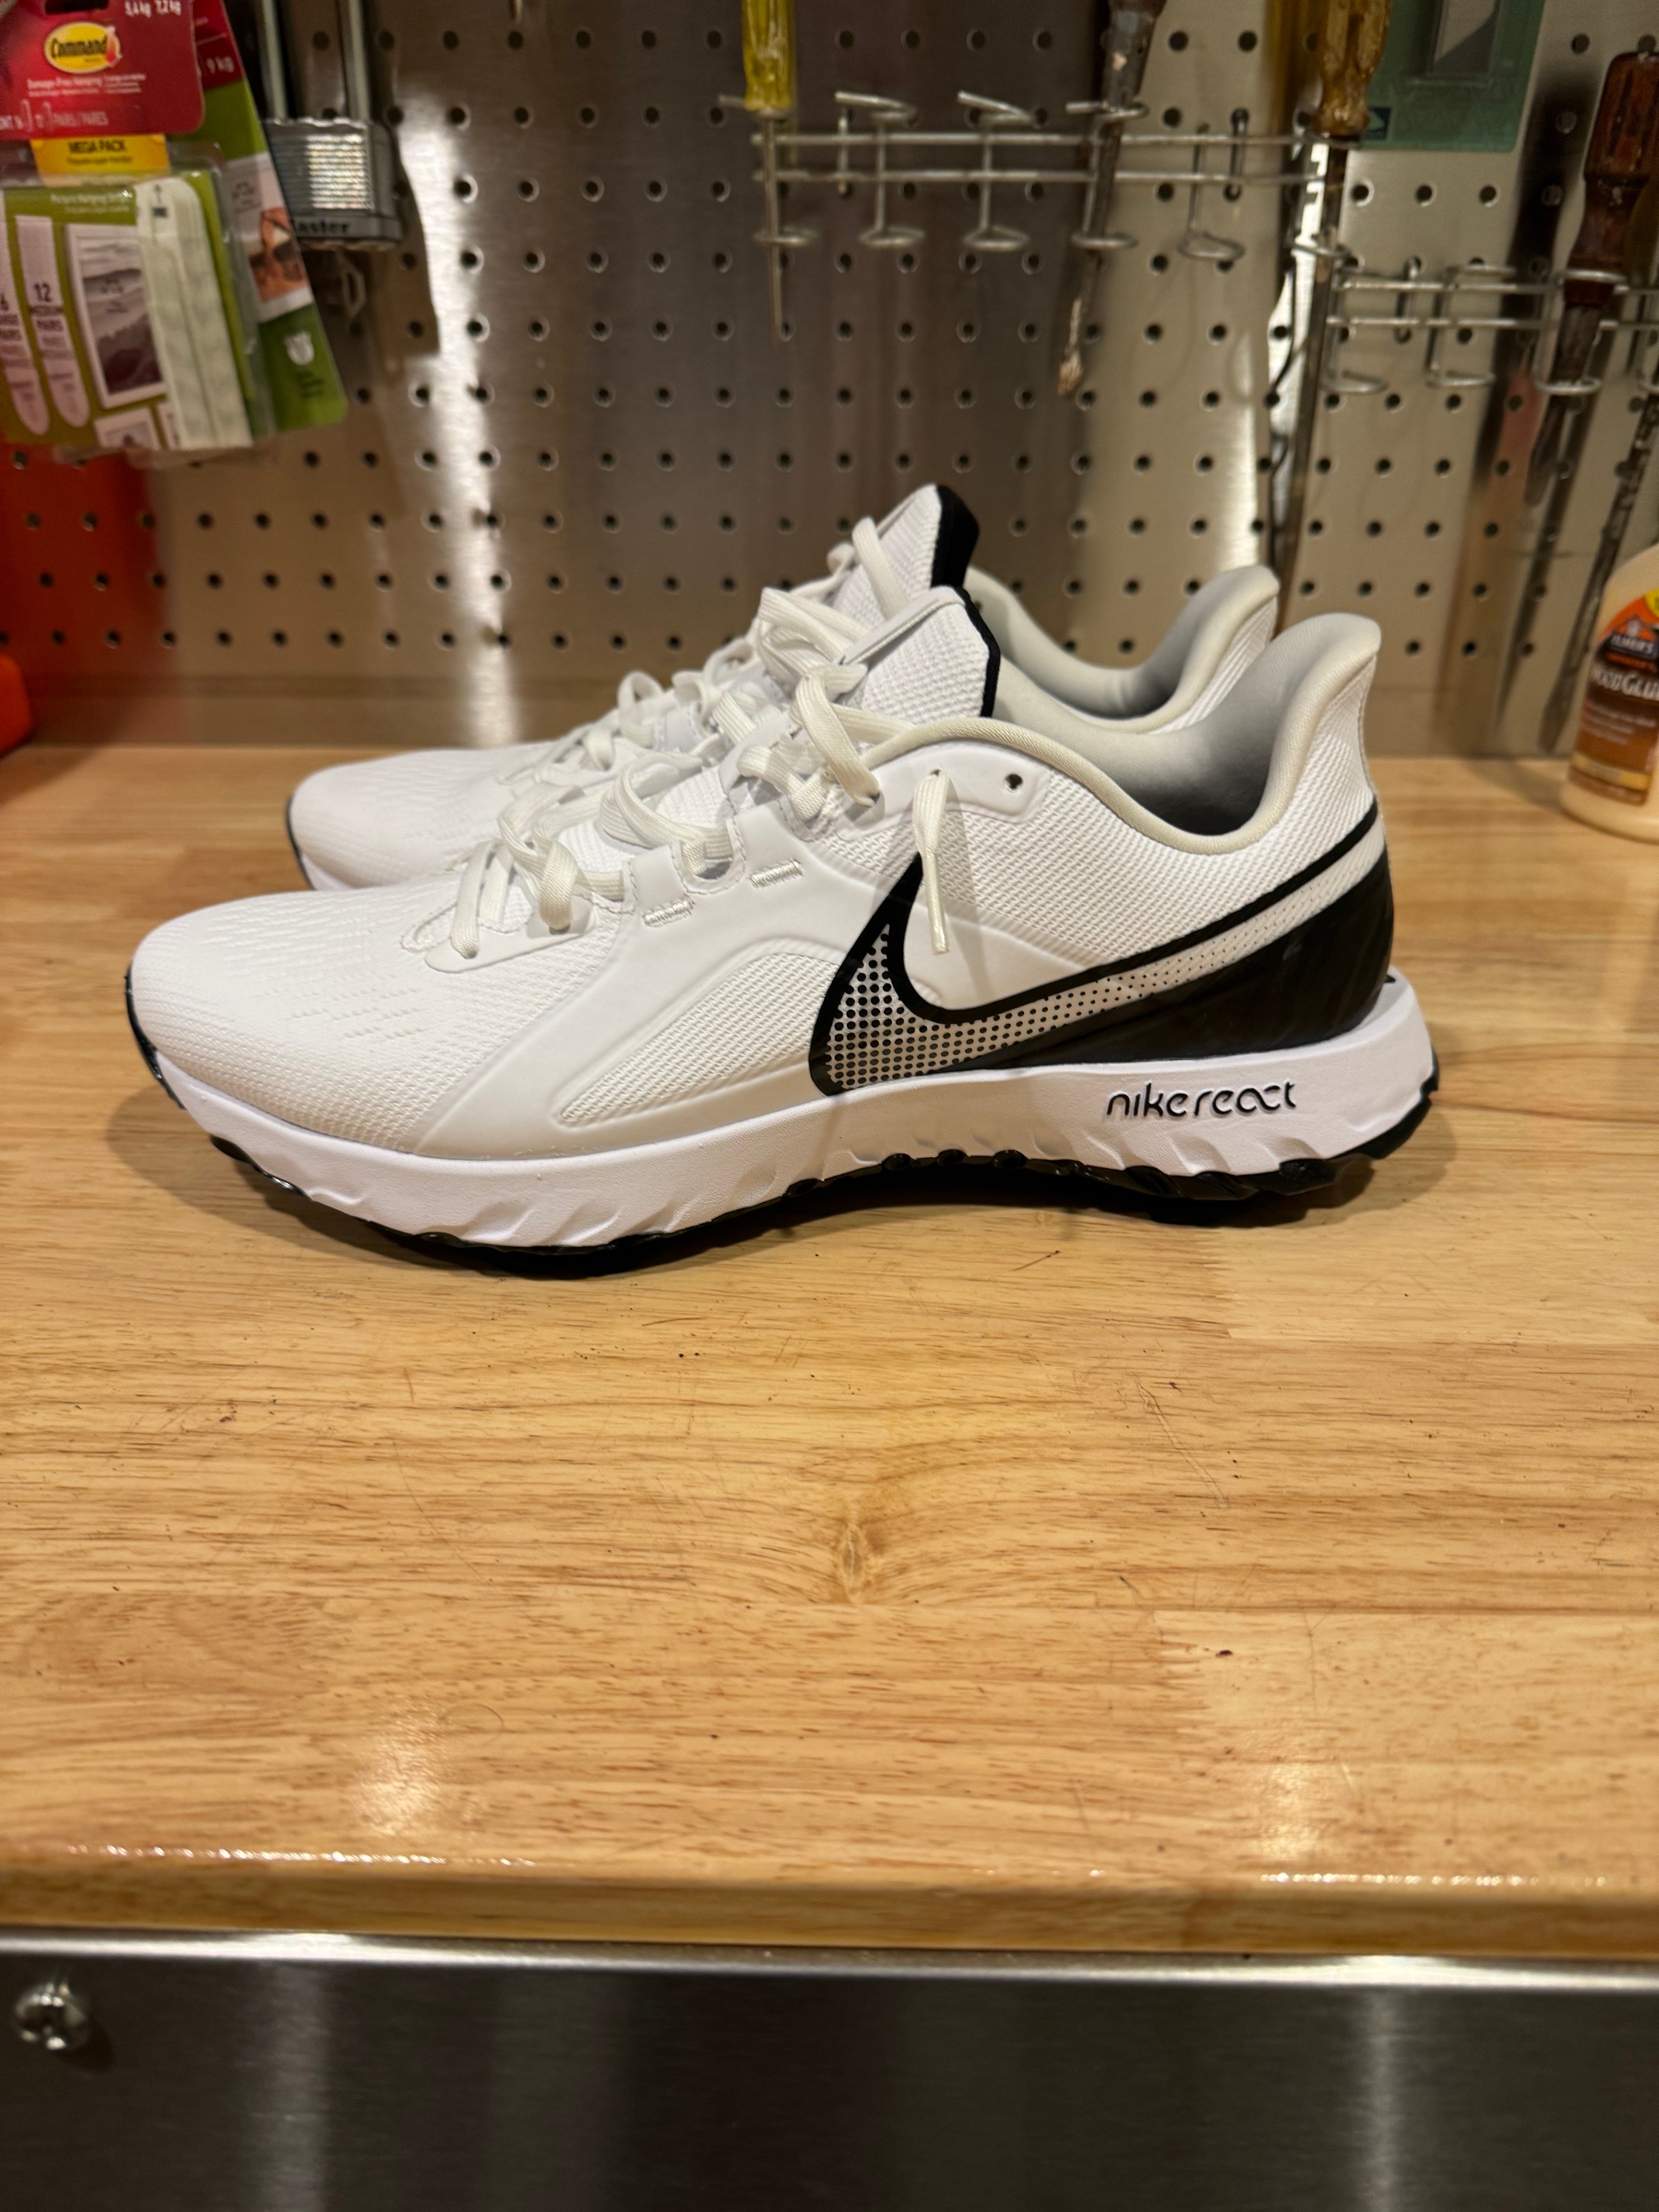 *NEW* Nike React Infinity Pro Golf Shoes (Size 11)